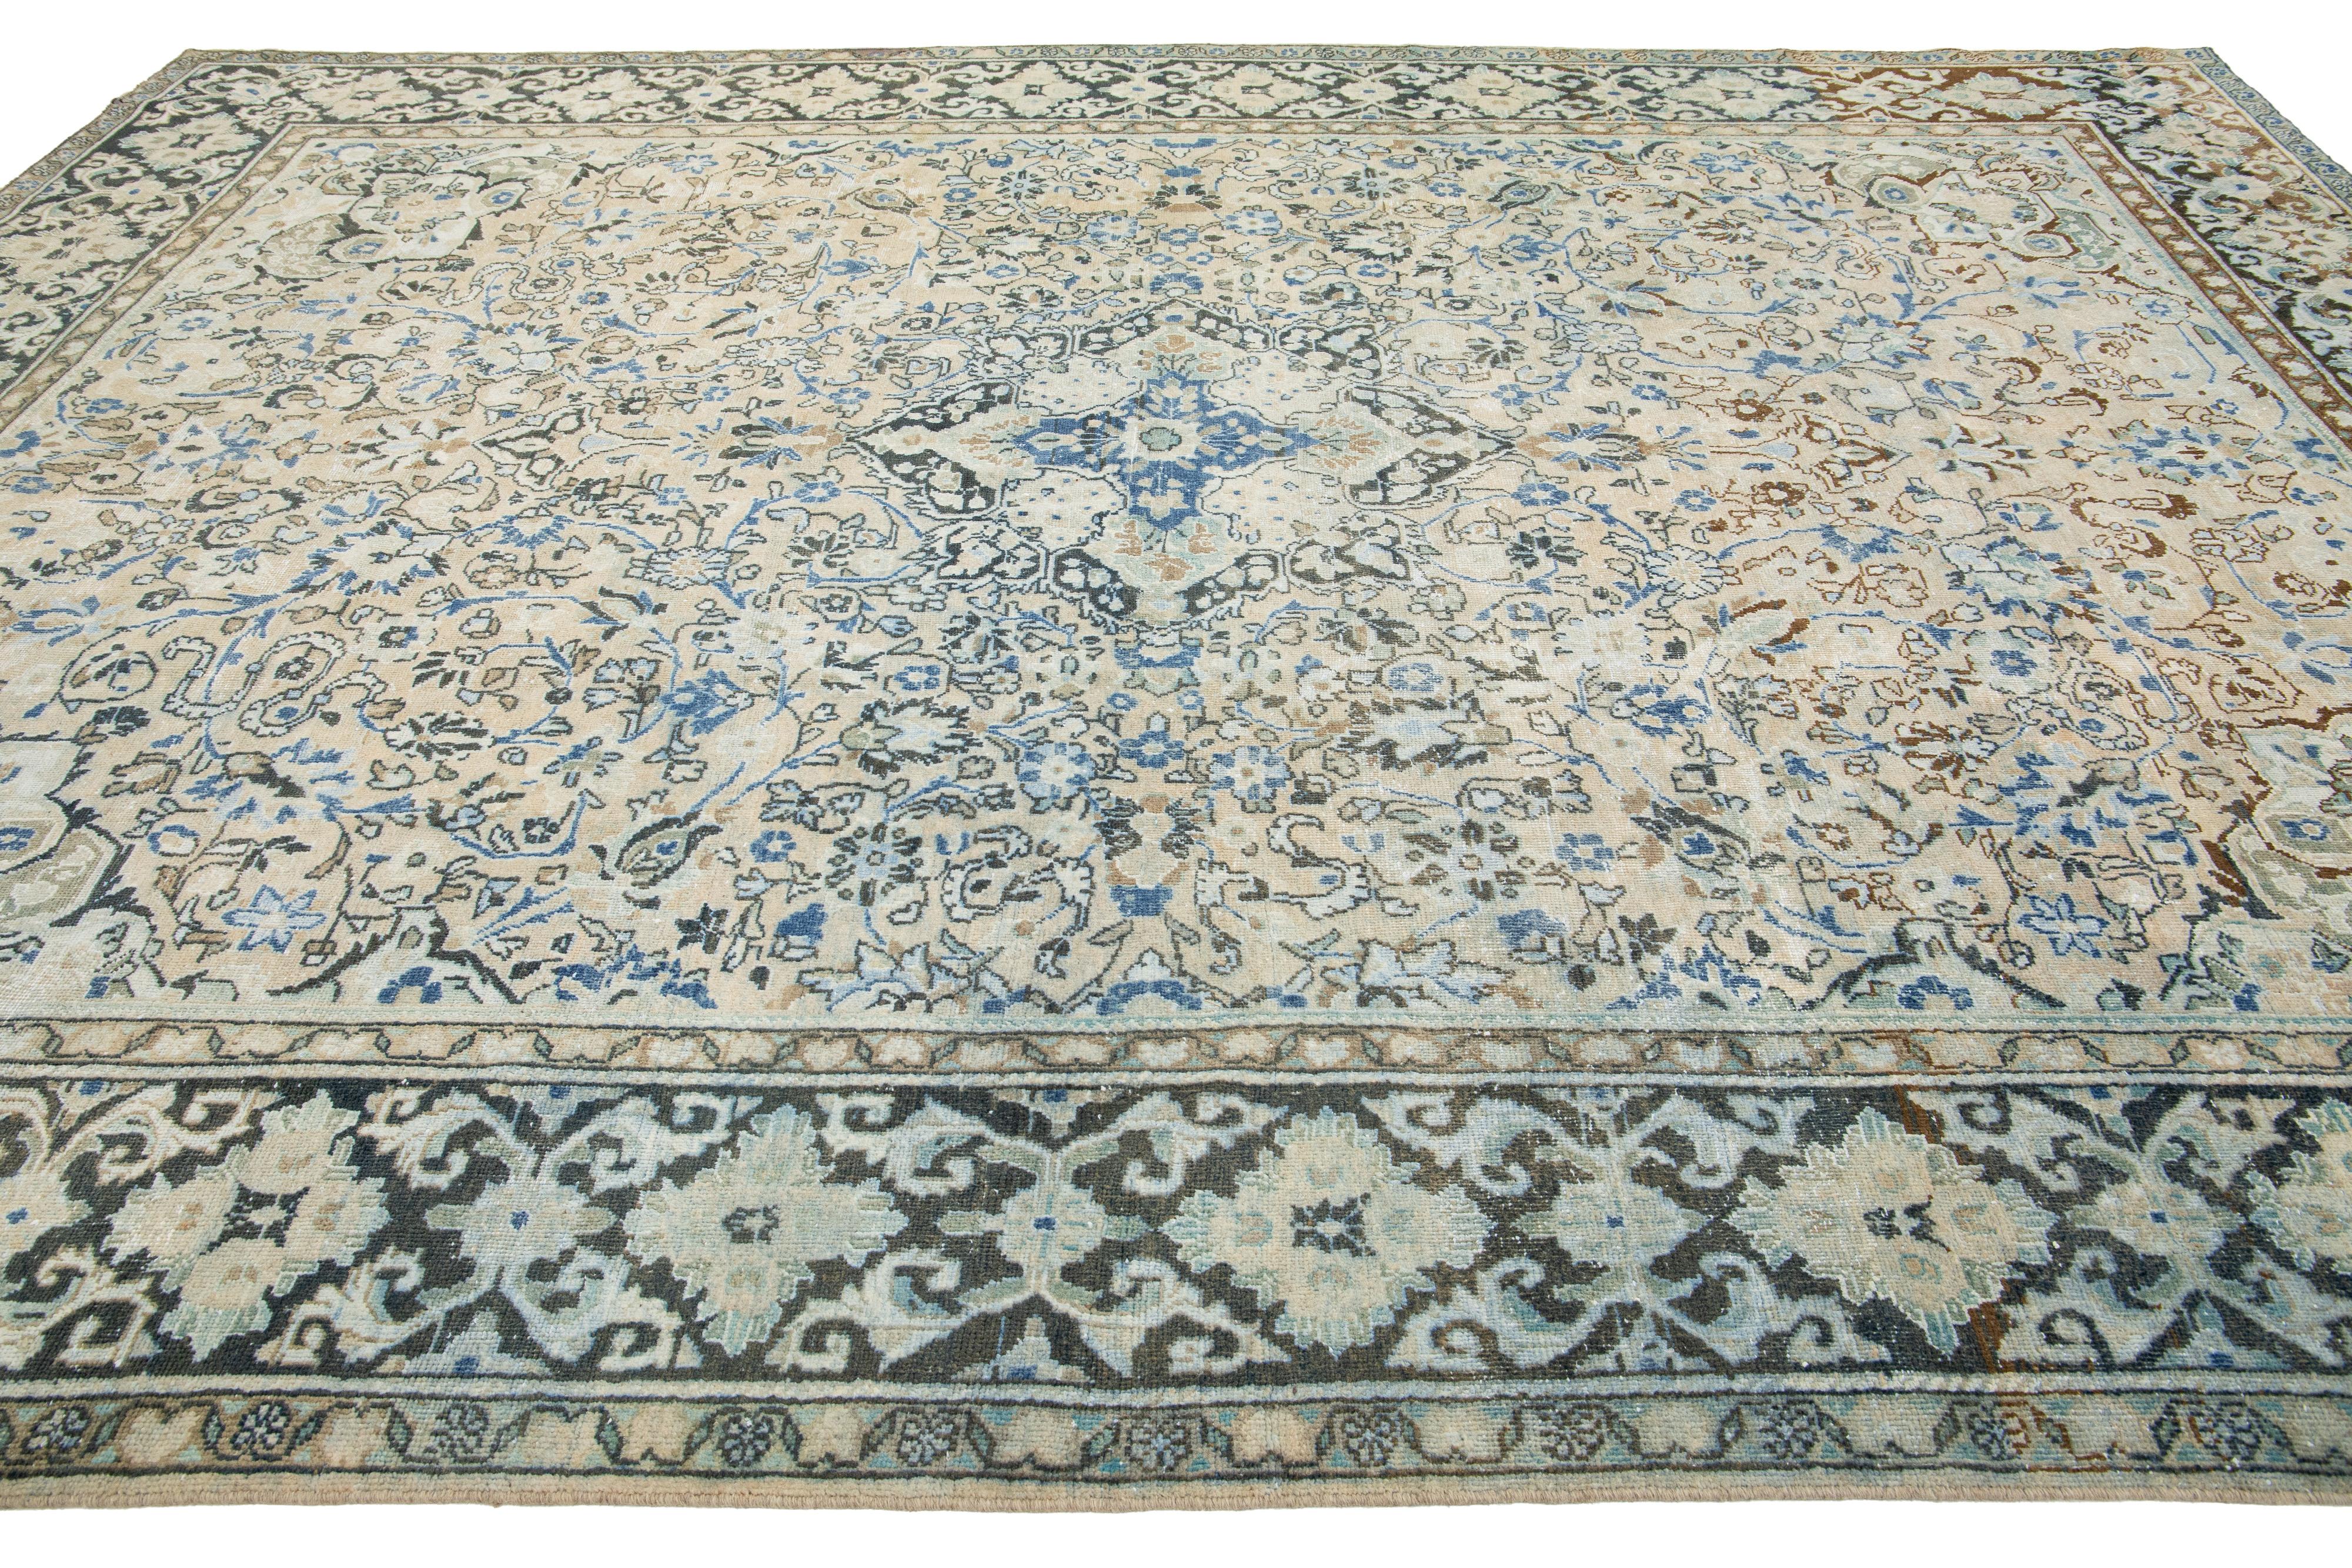 1930's Handmade Persian Mahal Wool Rug Featuring an Allover Blue Pattern  In Good Condition For Sale In Norwalk, CT